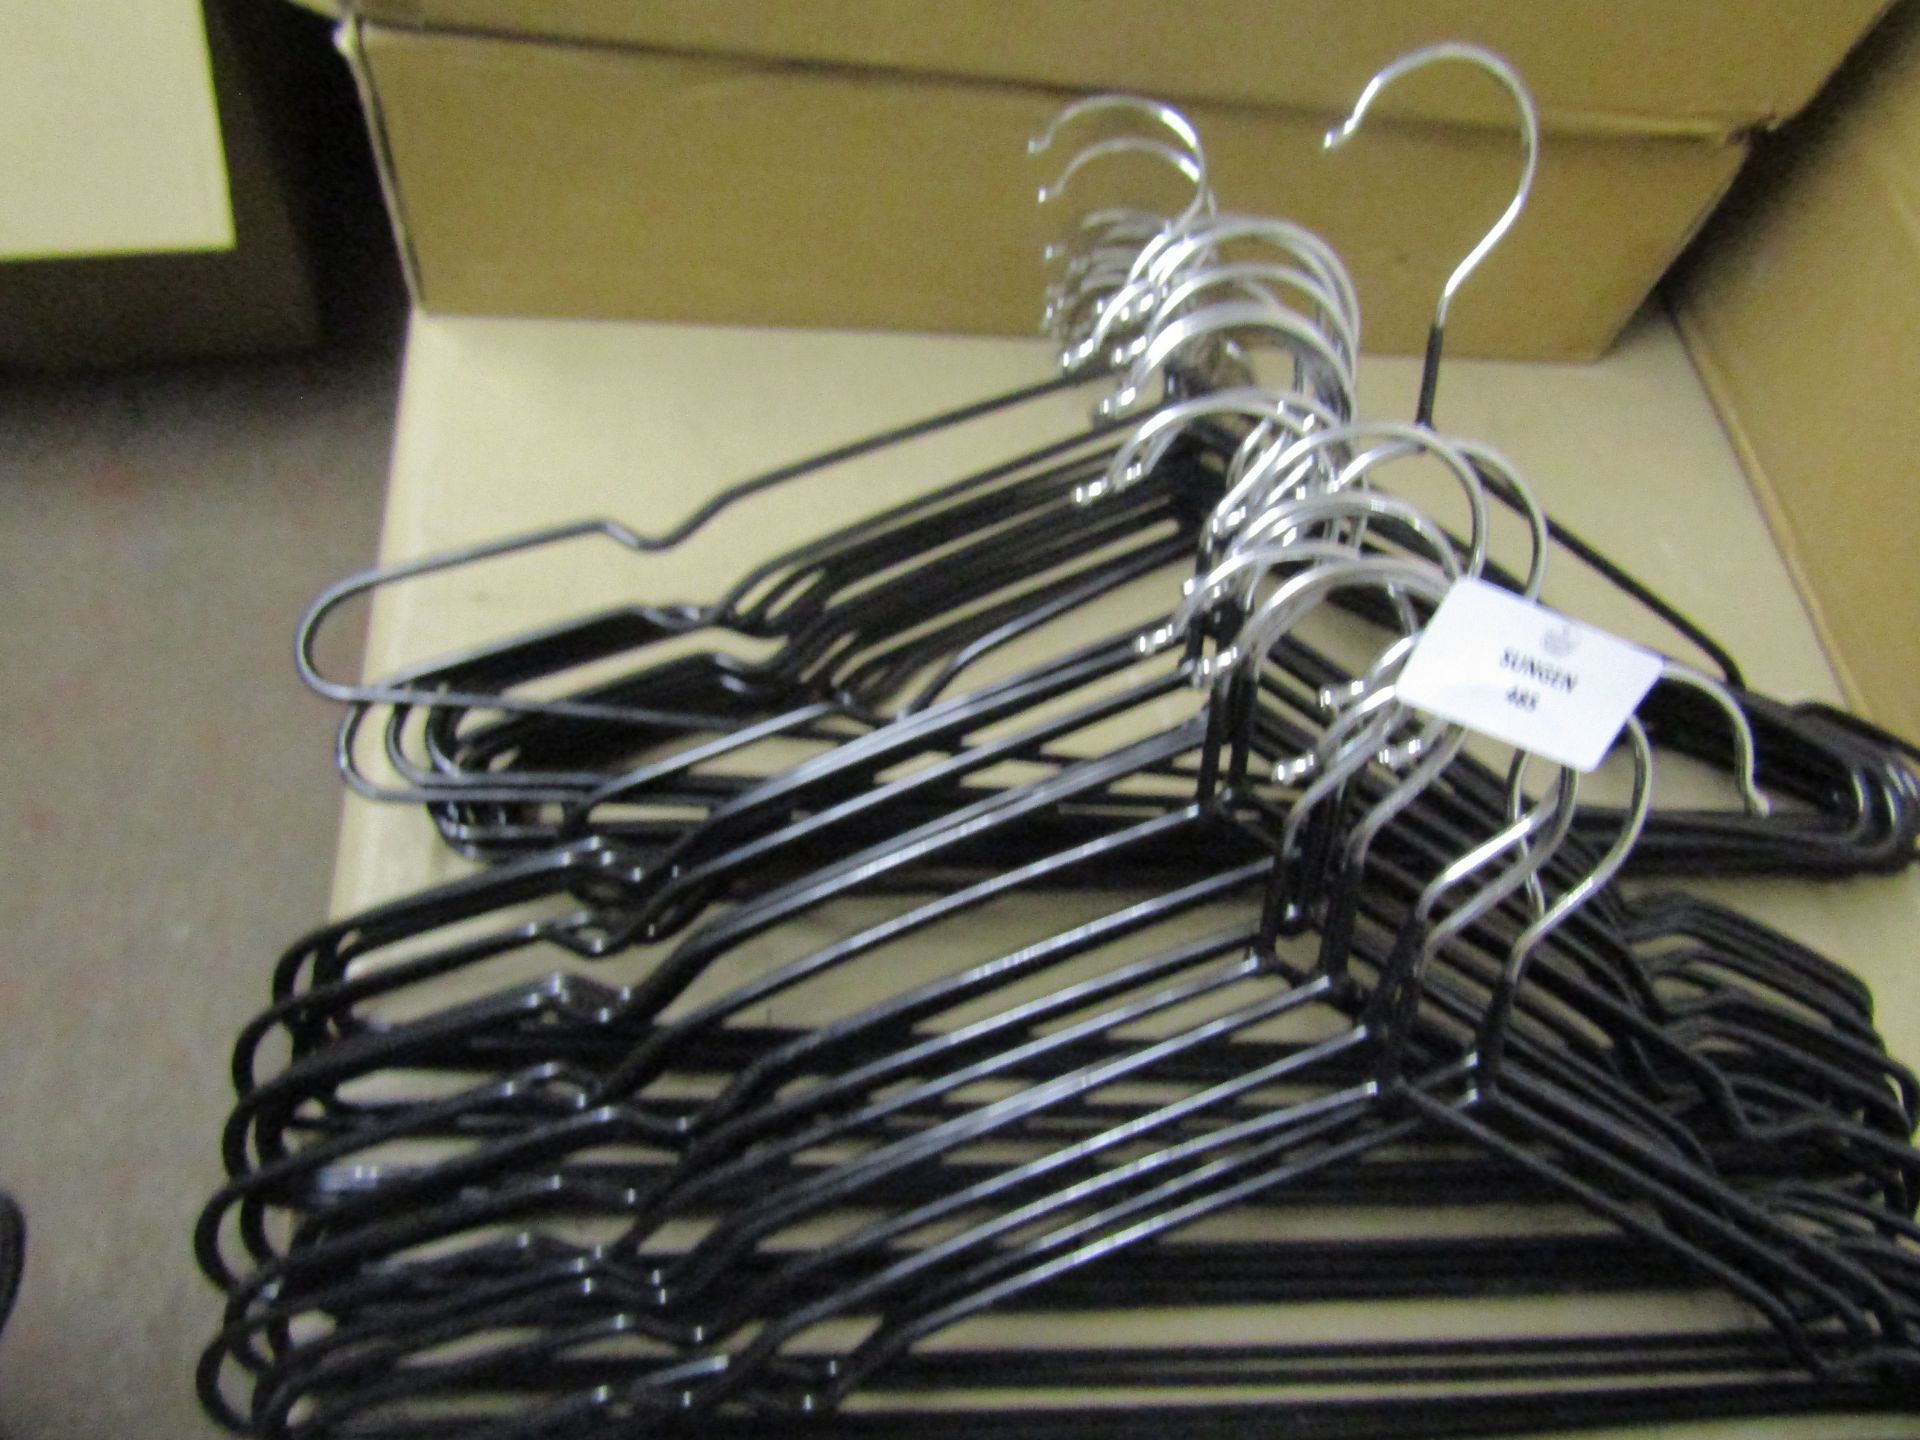 Approx 37x Asab Black Metal Coat Hangers - Good Condition & Unboxed.